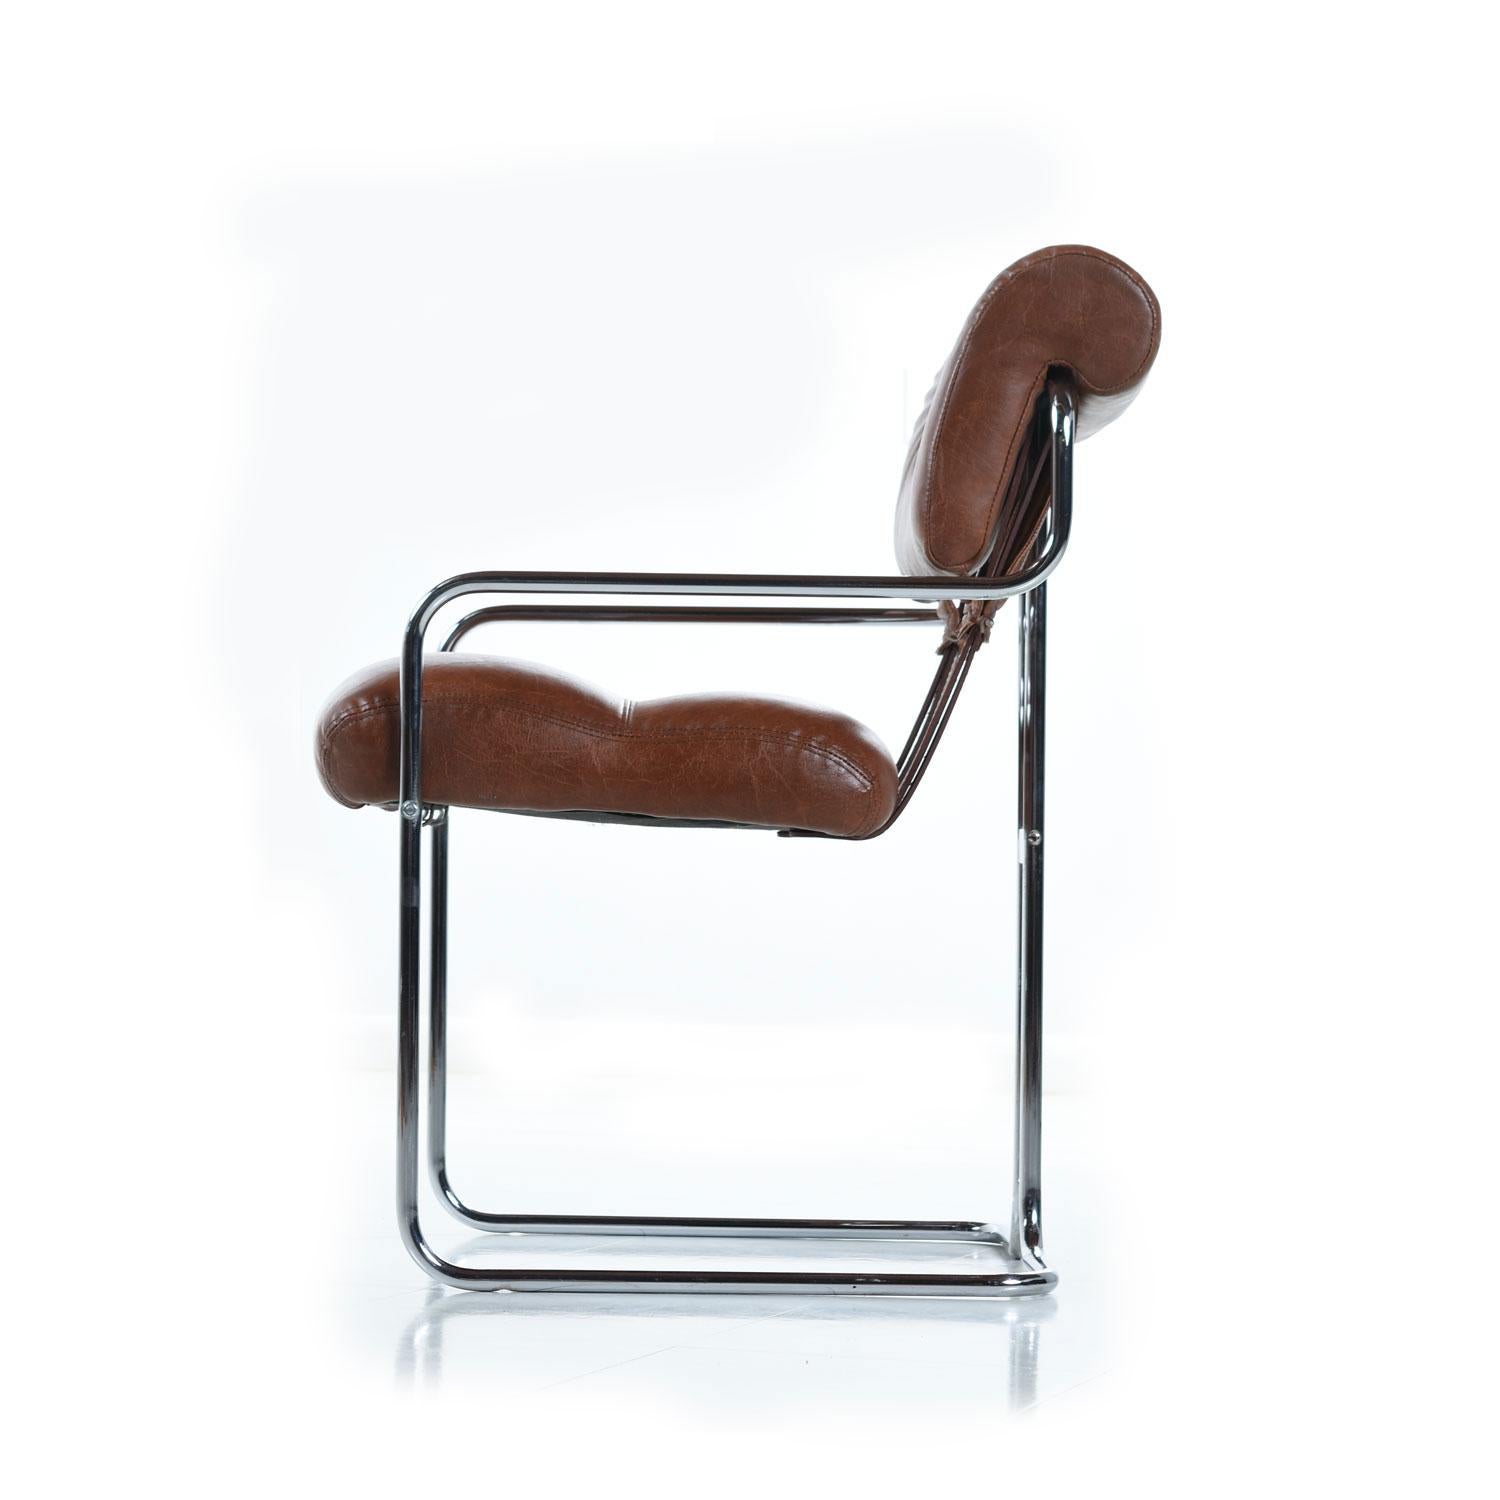 A set of Tucroma dining chairs designed by Guido Faleschini in 1972 and produced in Italy by Mariani for Leon Rosen's Pace collection. Polished tubular chrome frames with a mix of original leather straps and newer commercial vinyl. The rich, caramel